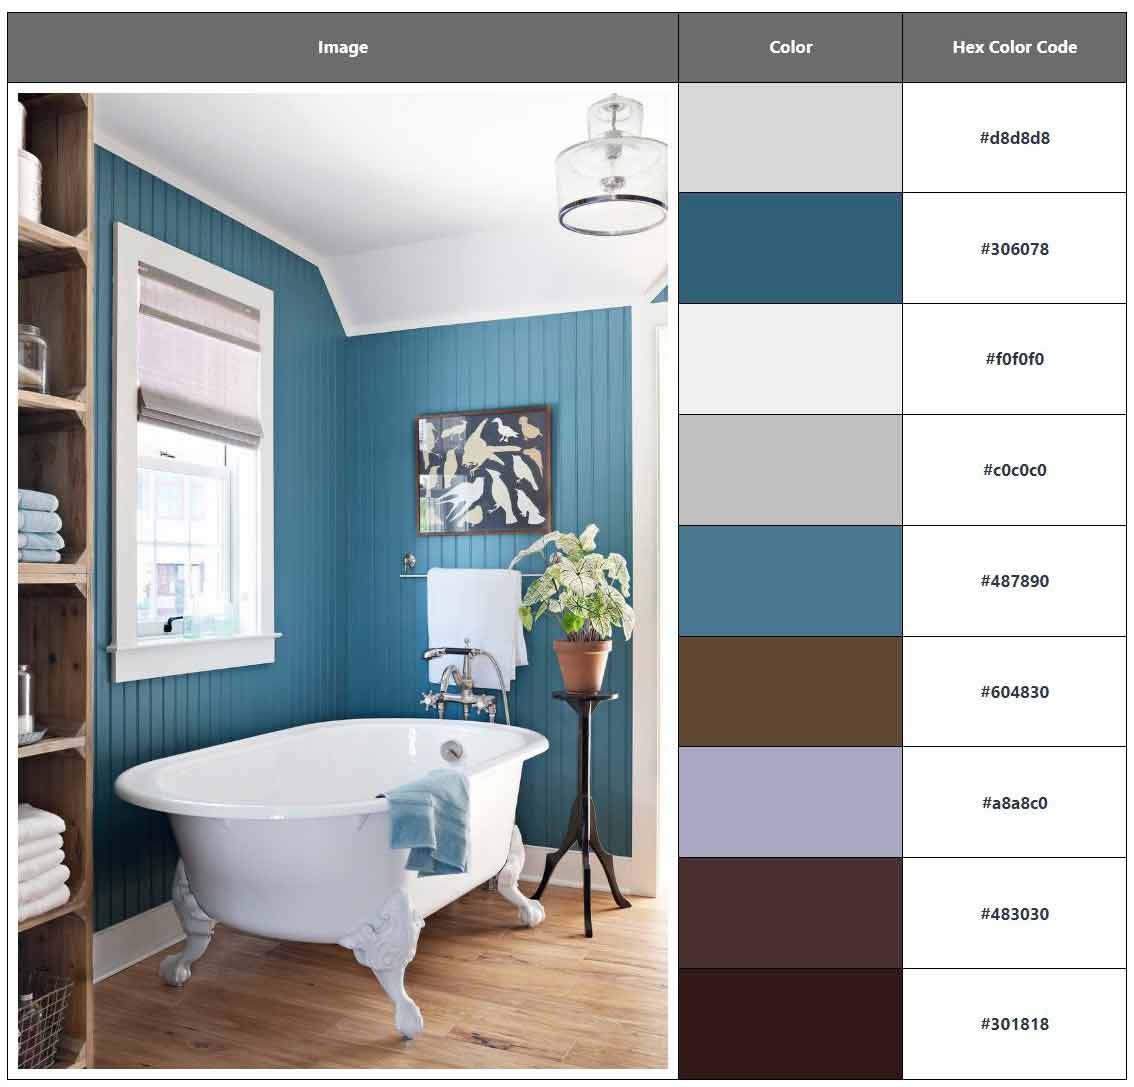 Color Palette Generator Example - Blue and White Bathroom Color Scheme With Hex Color Codes Included